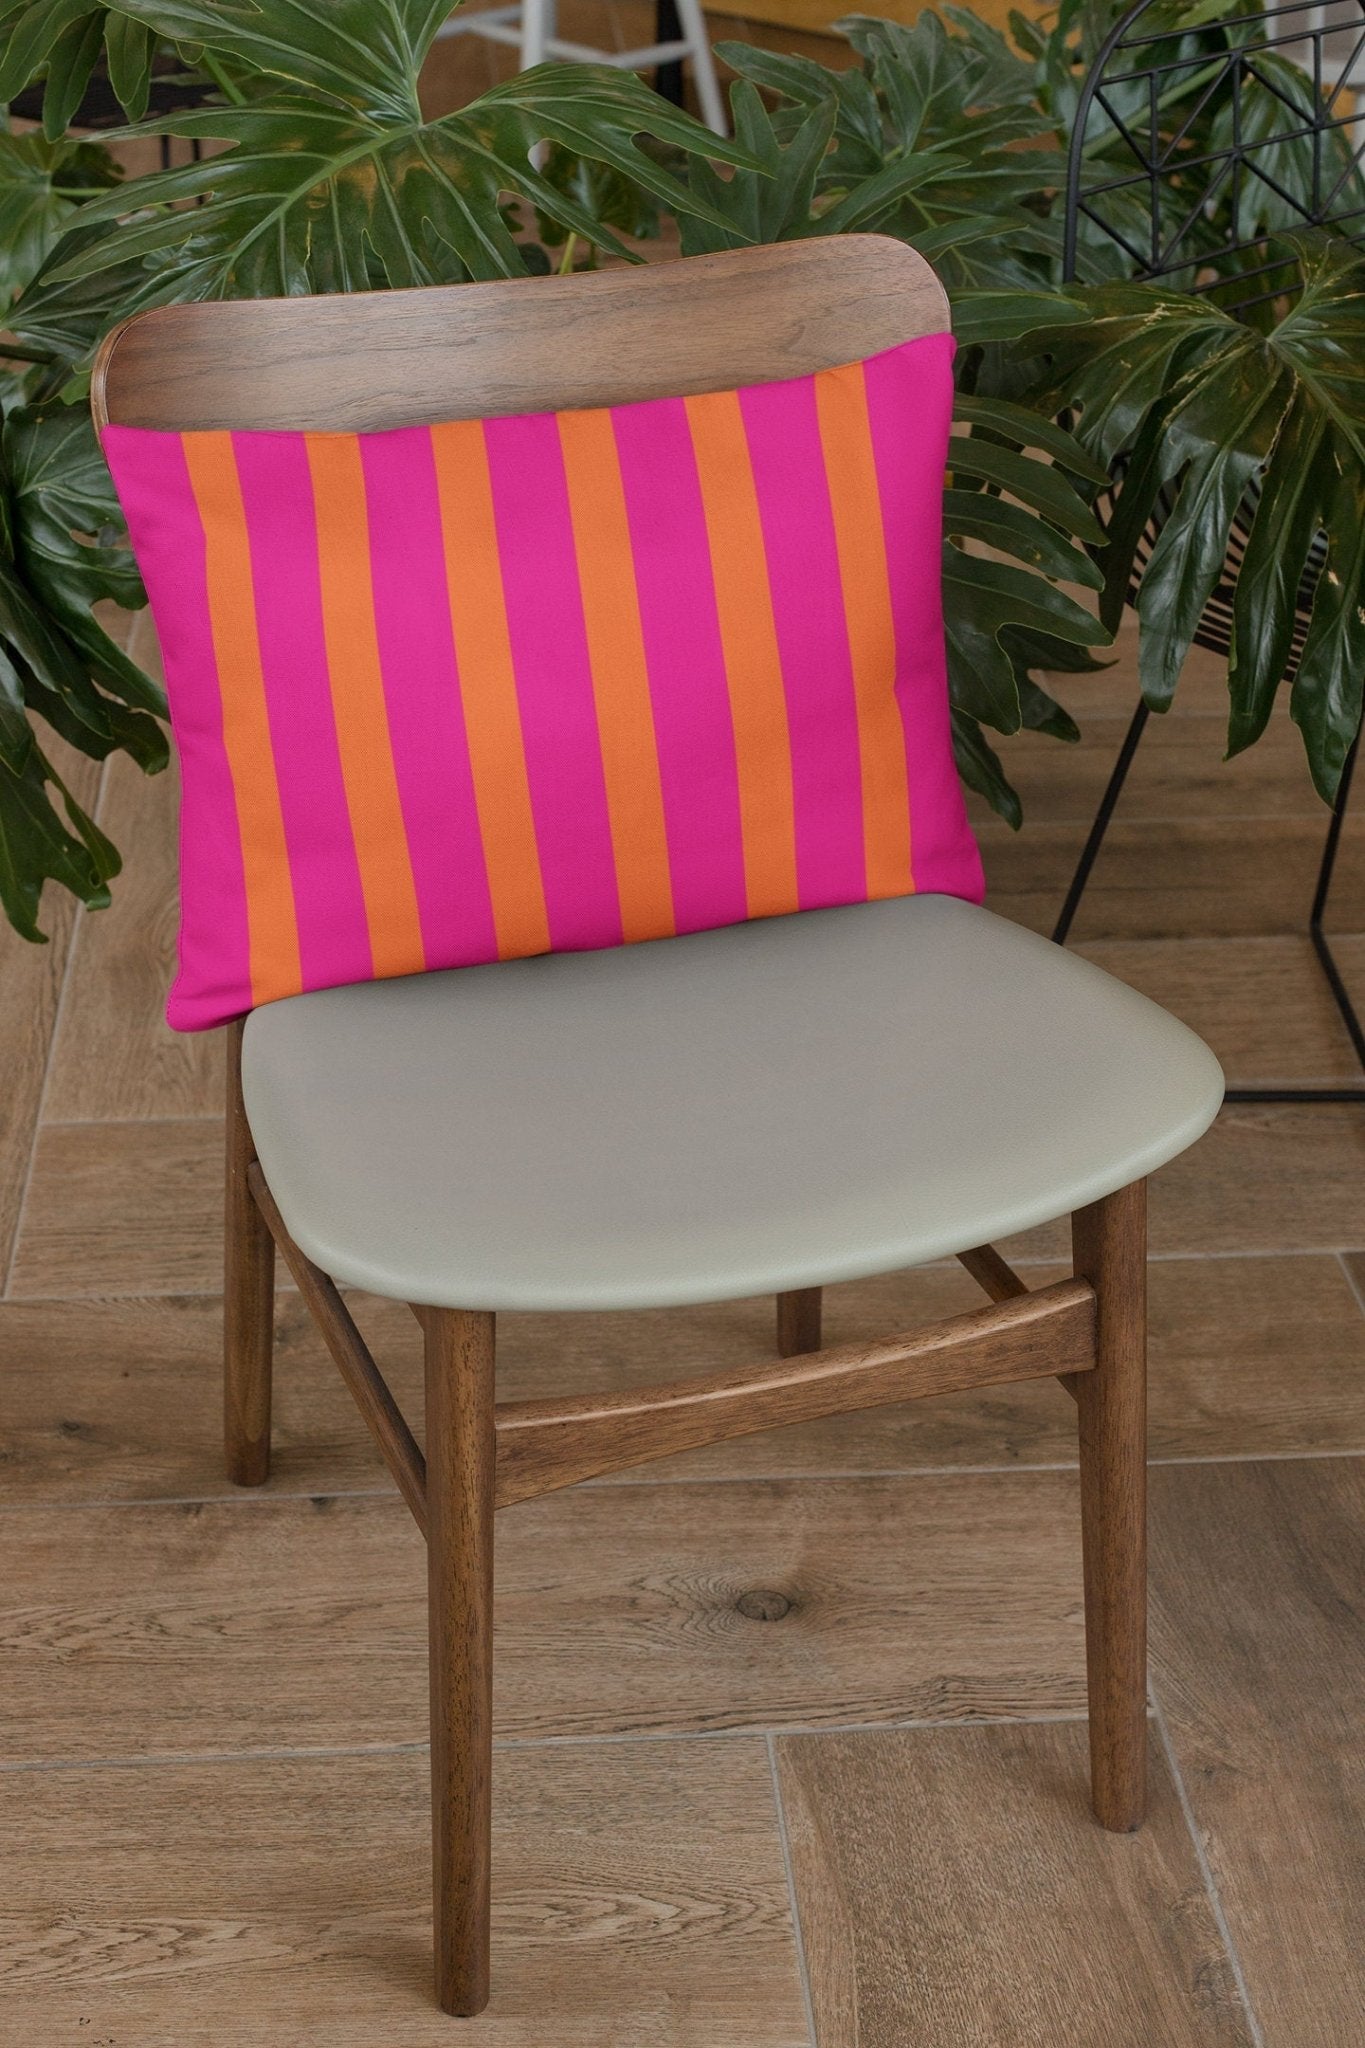 orange and pink outdoor lumbar pillow on chair with plants